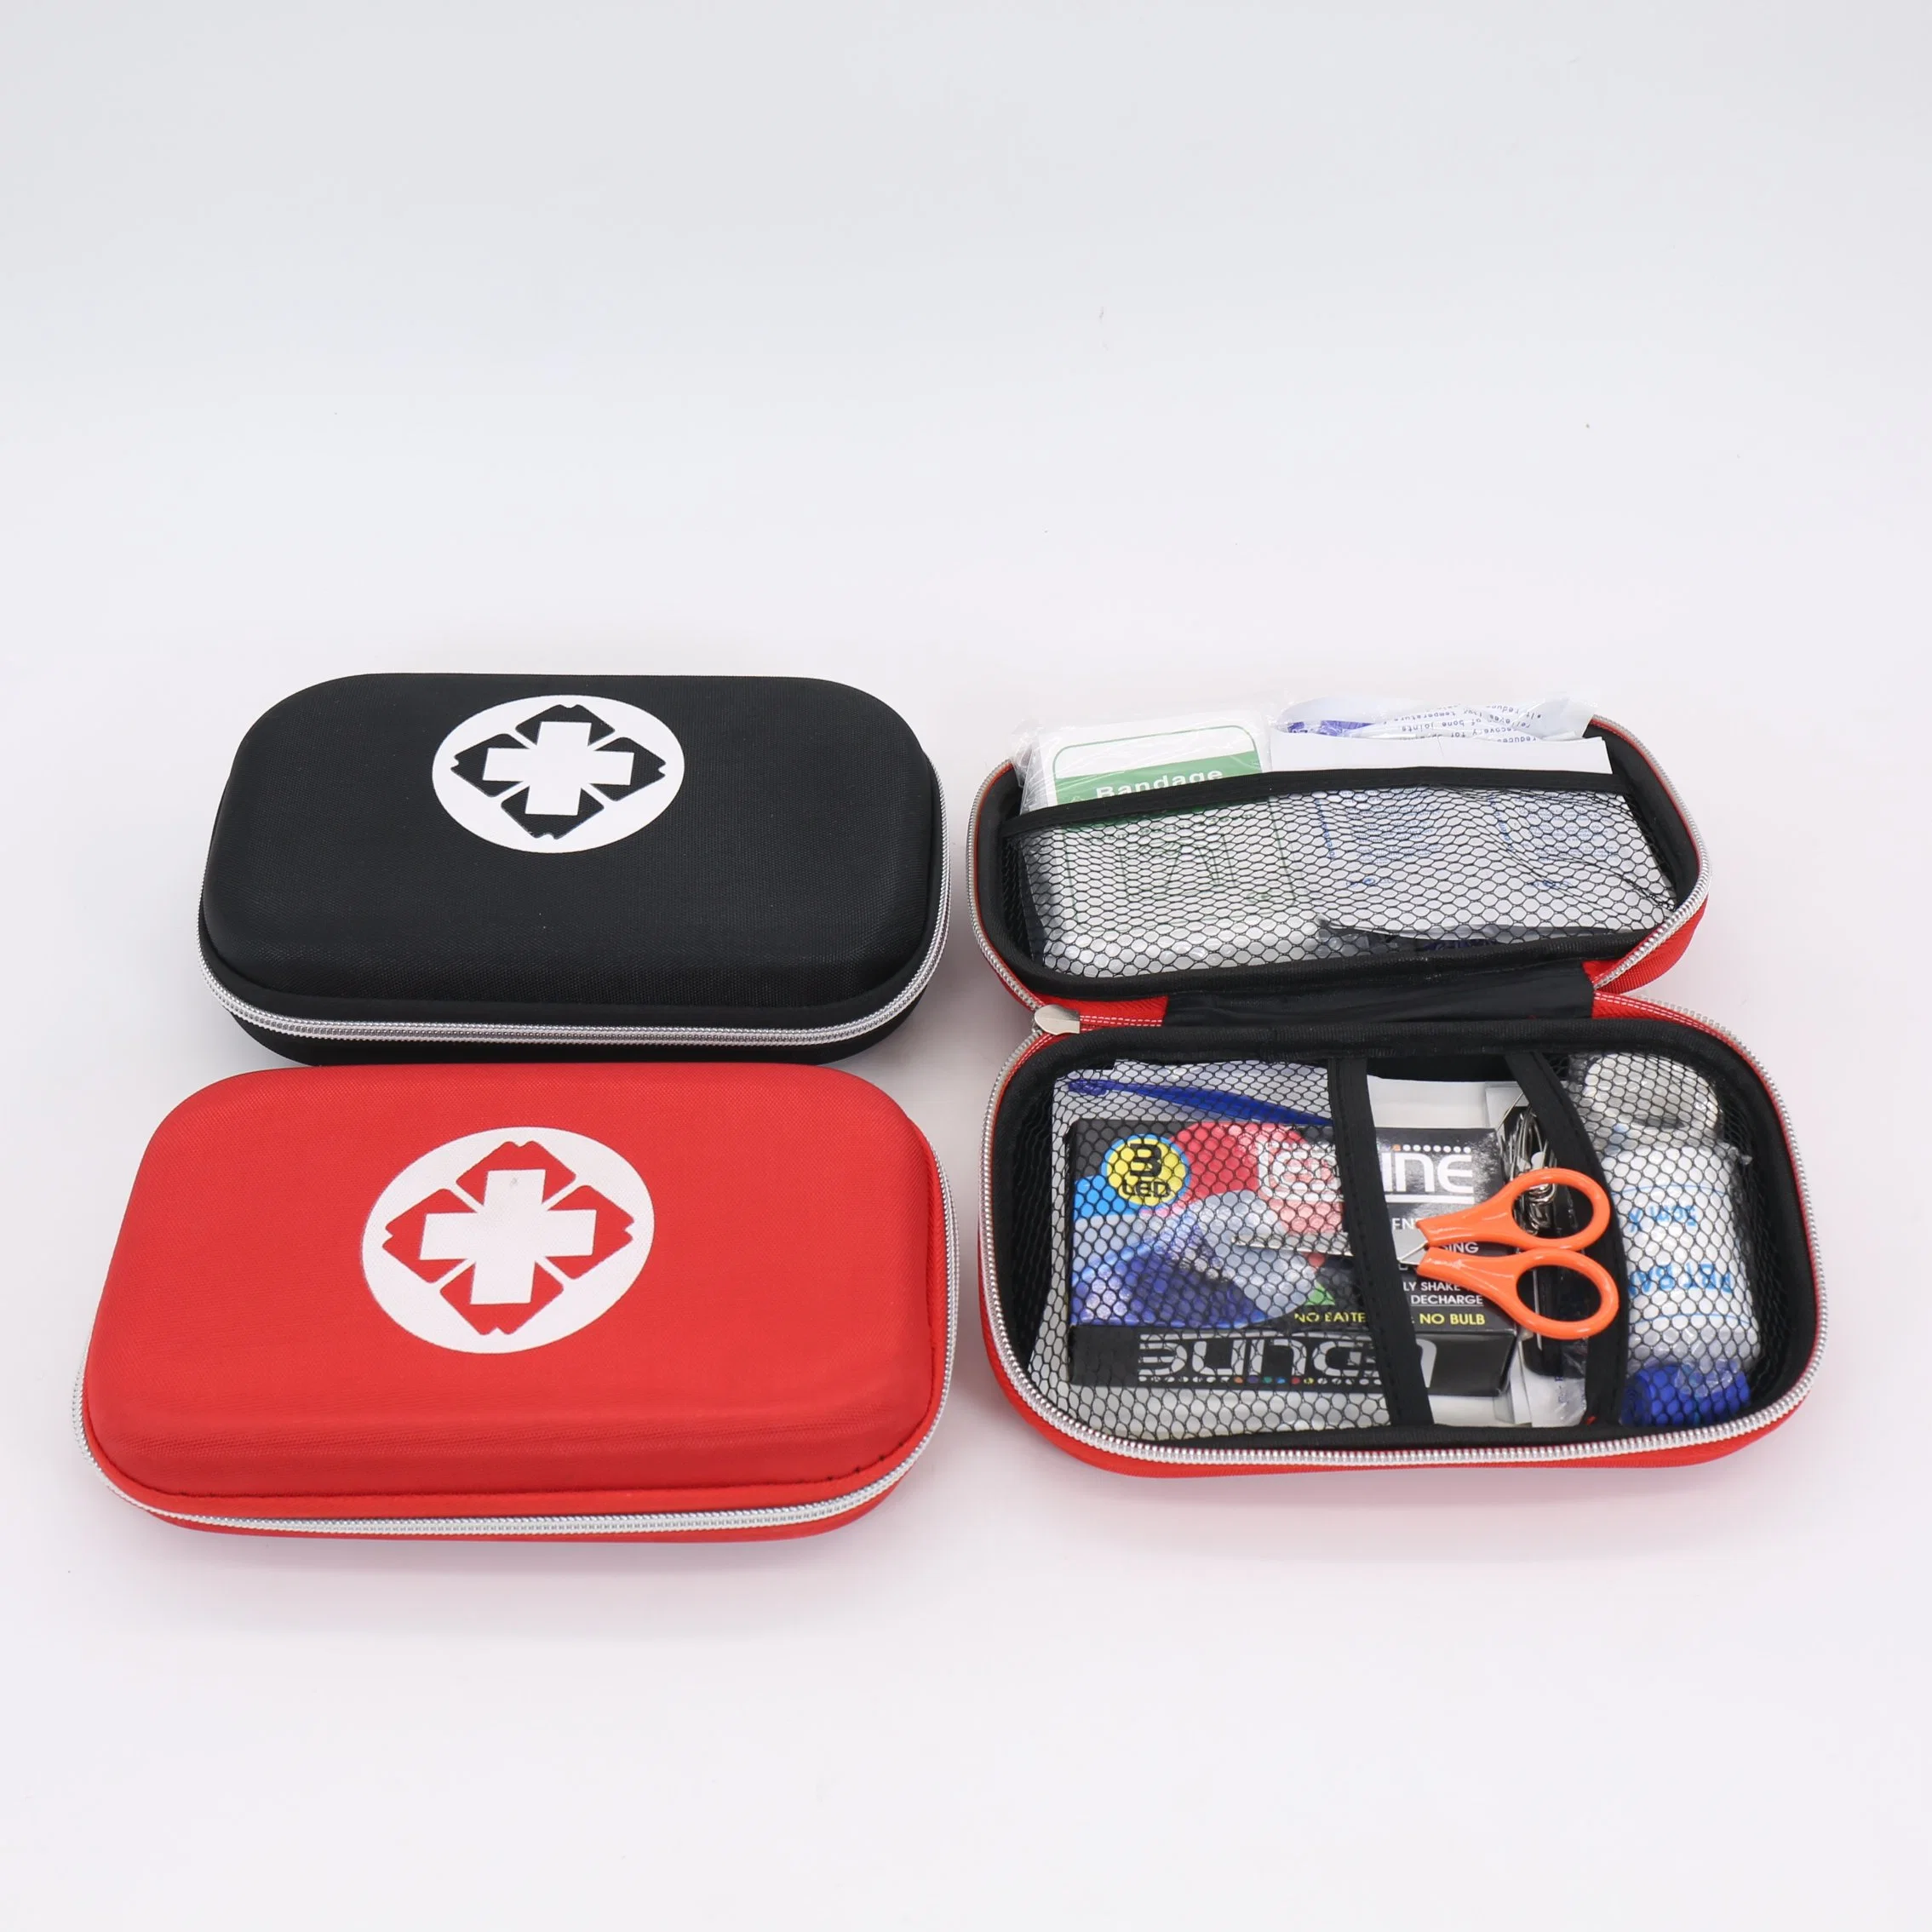 Hot Sale Emergency Survival Case with Medical Supplies